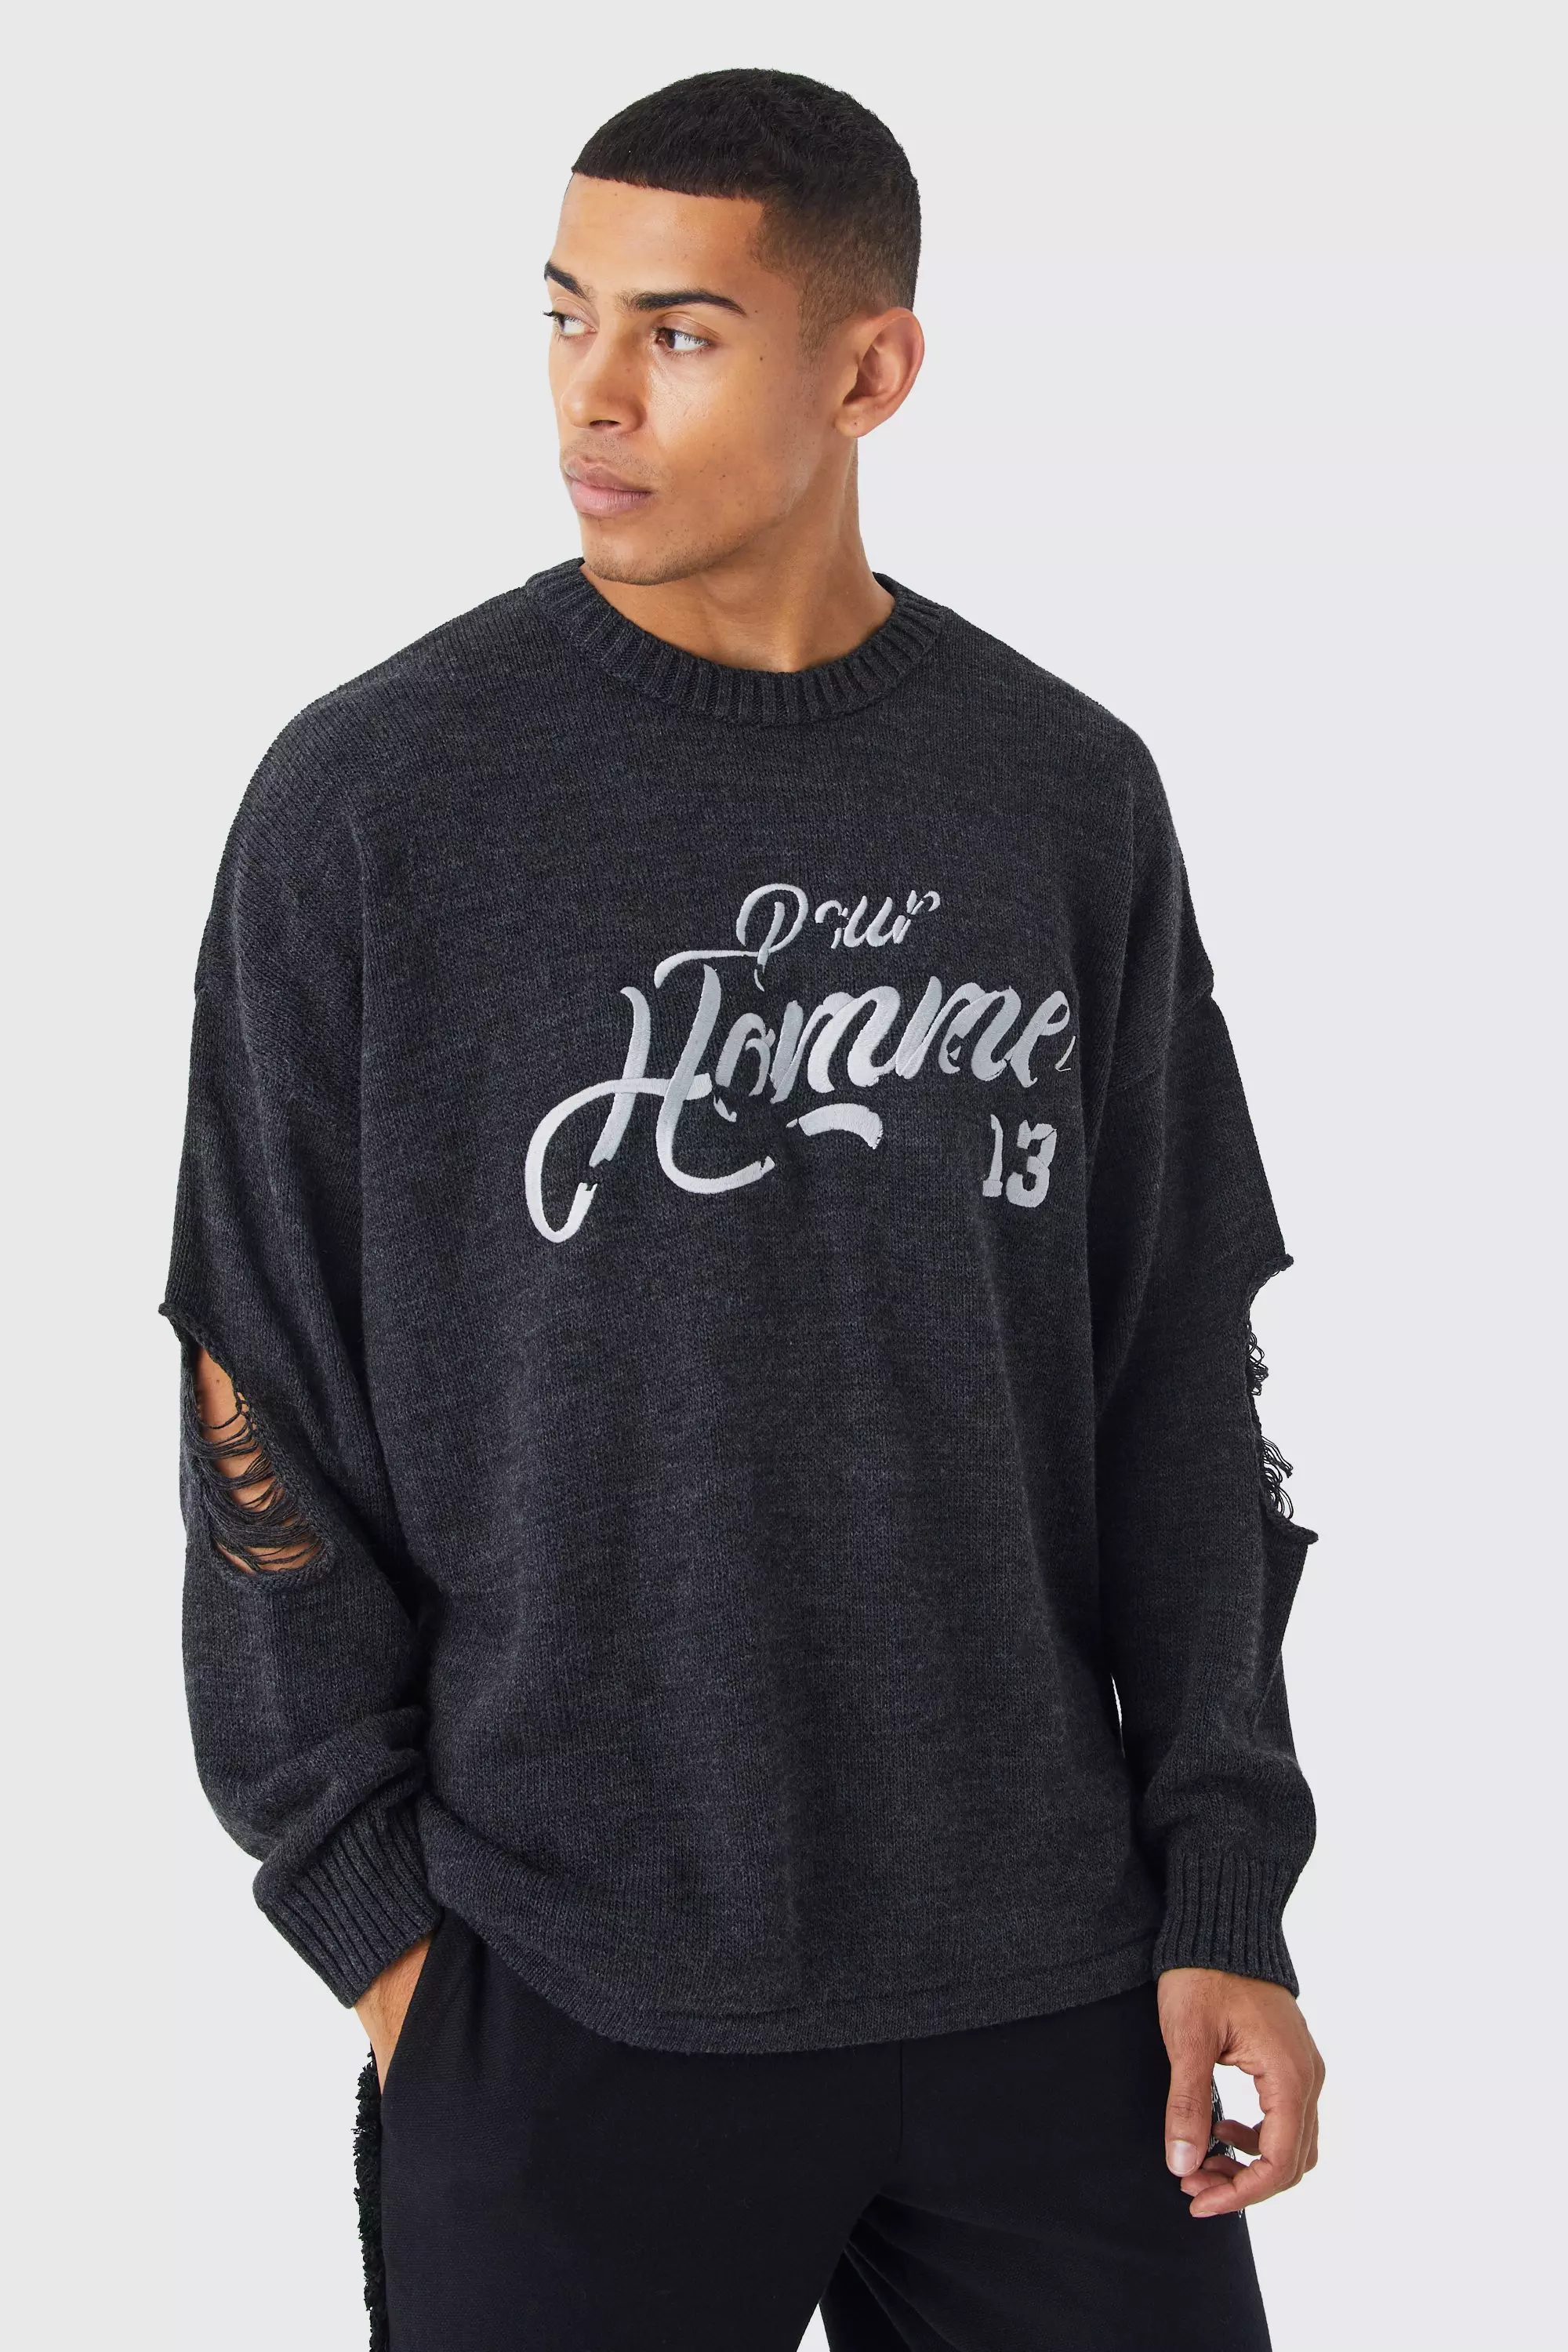 Black Oversized Homme Applique Distressed Sweater